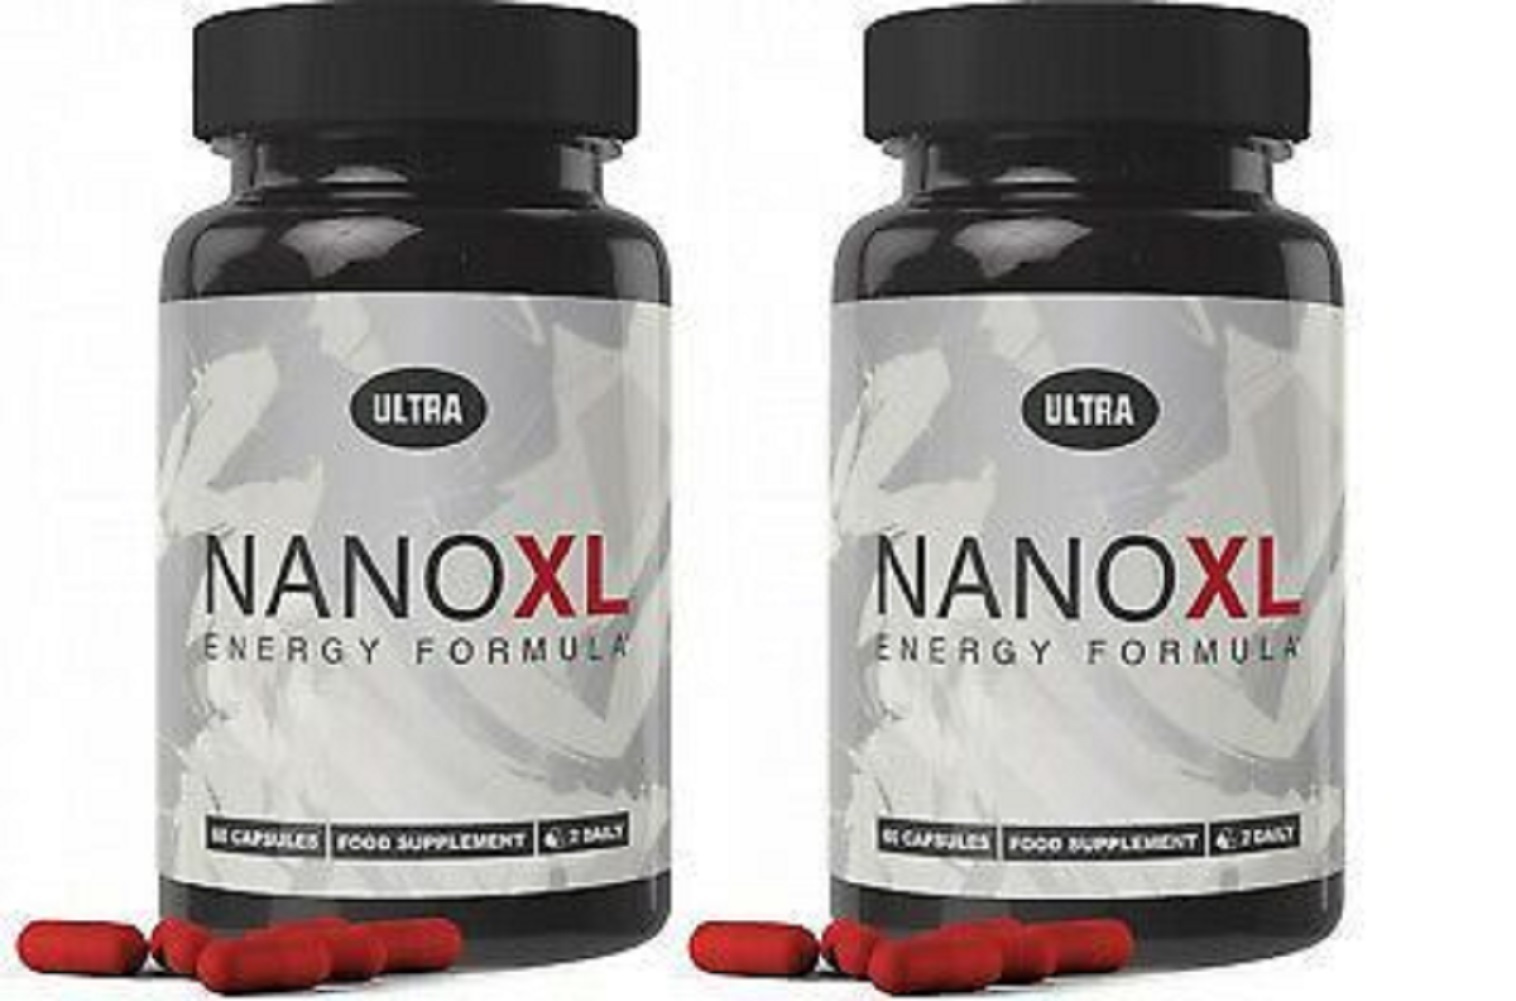 Ultra Strong Nano XL Energy Formula Capsules X 2 Tubs Other Vitamins & Supplements